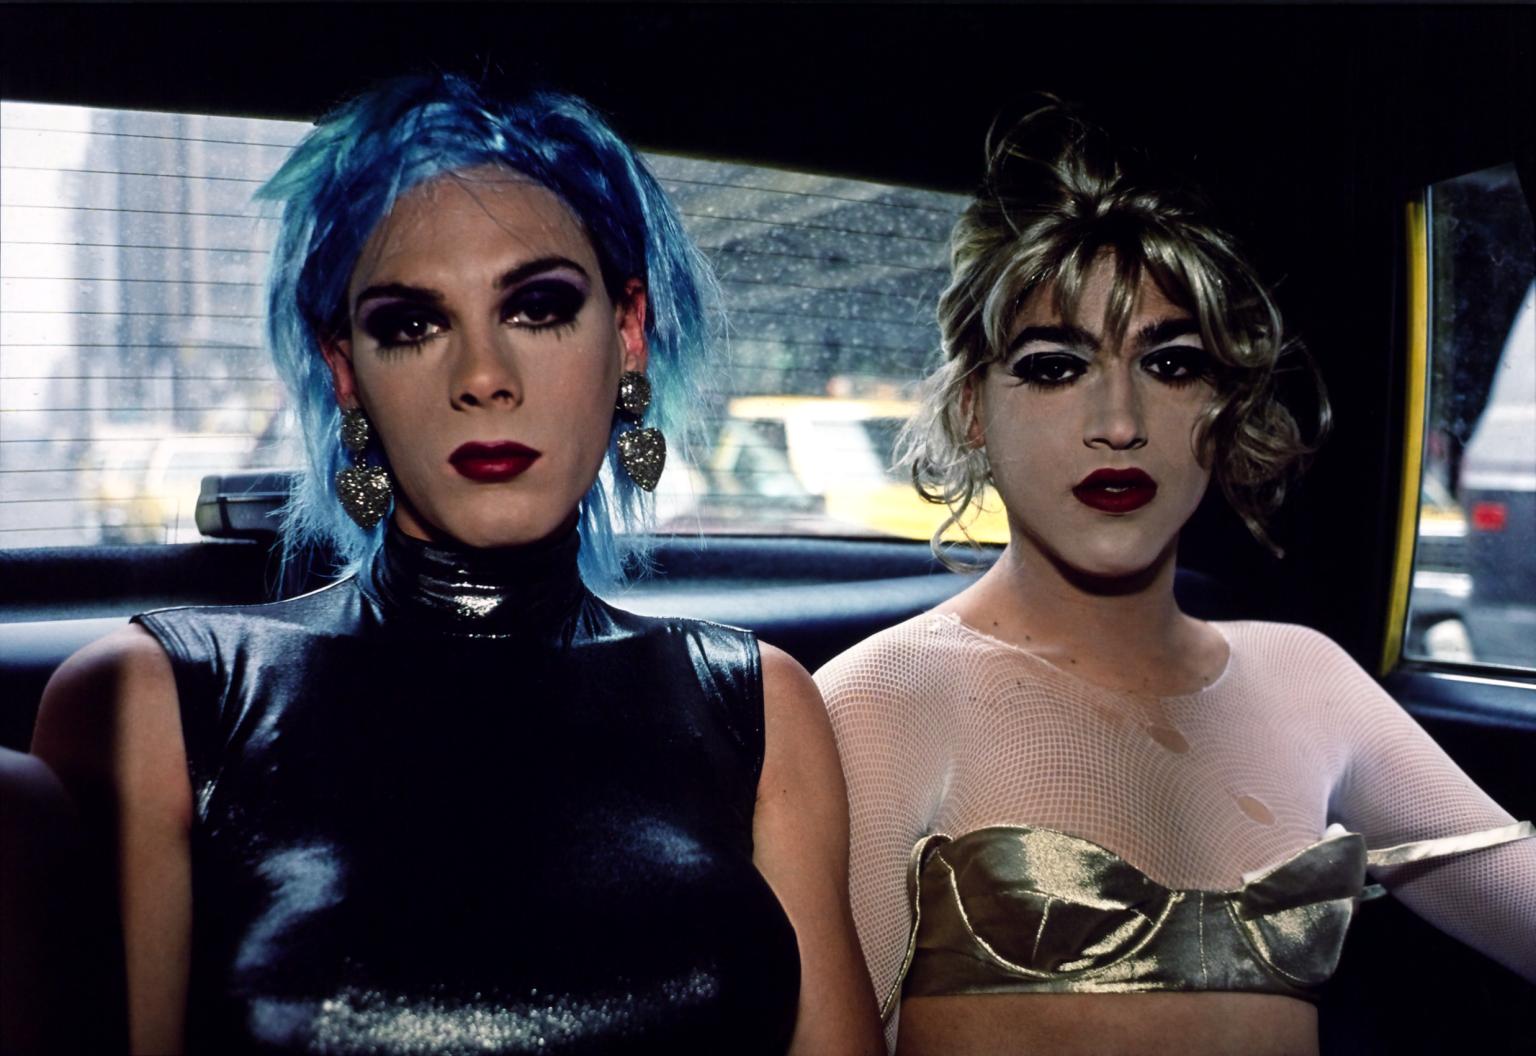 Misty and Jimmy Paulette in a taxi, NYC 1991. Nan Goldin.